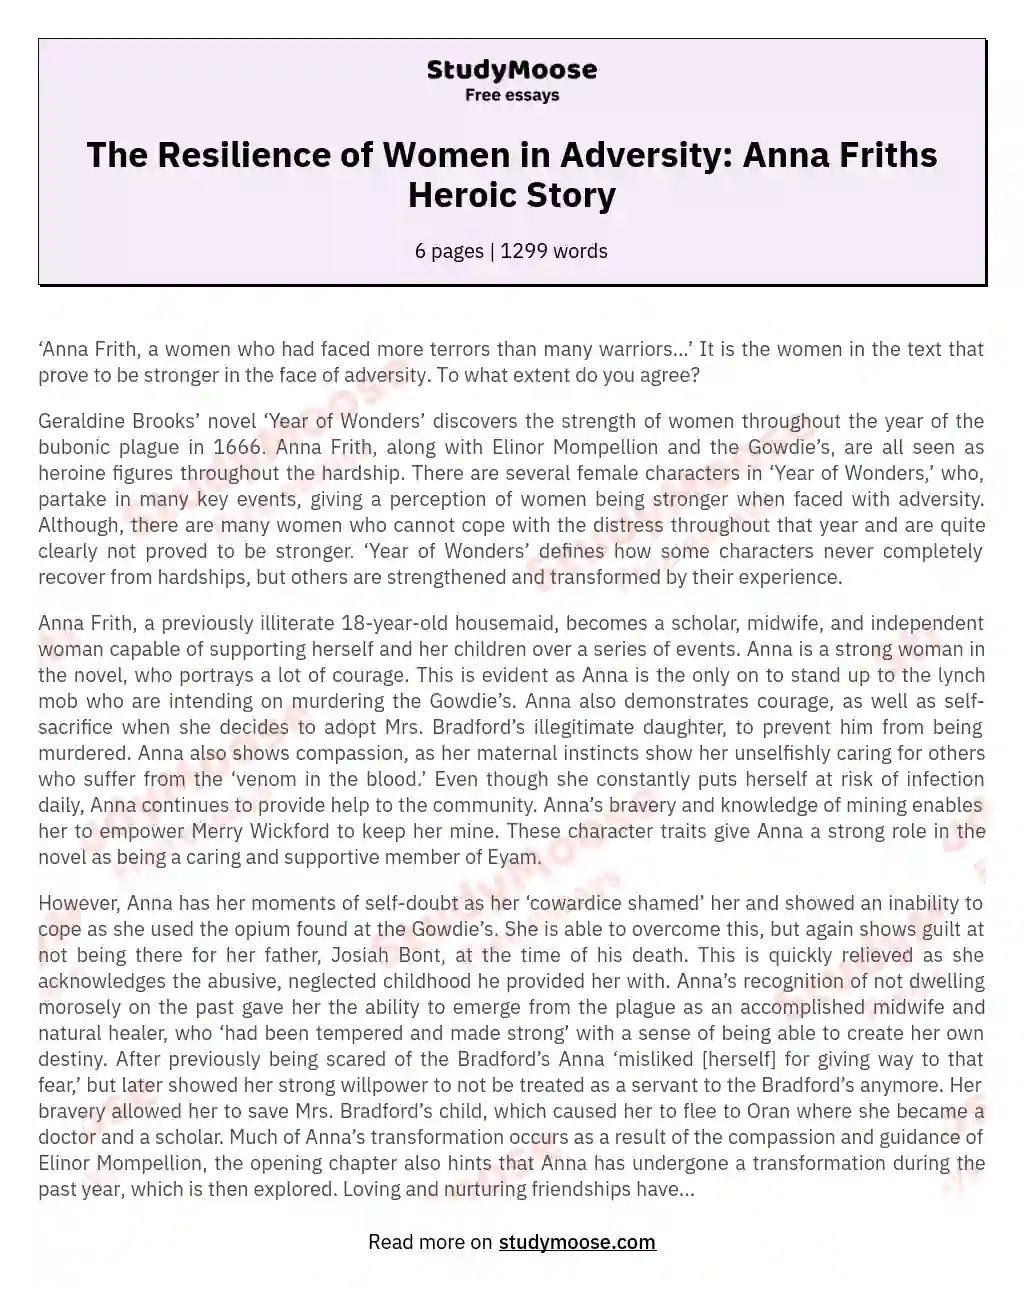 The Resilience of Women in Adversity: Anna Friths Heroic Story essay